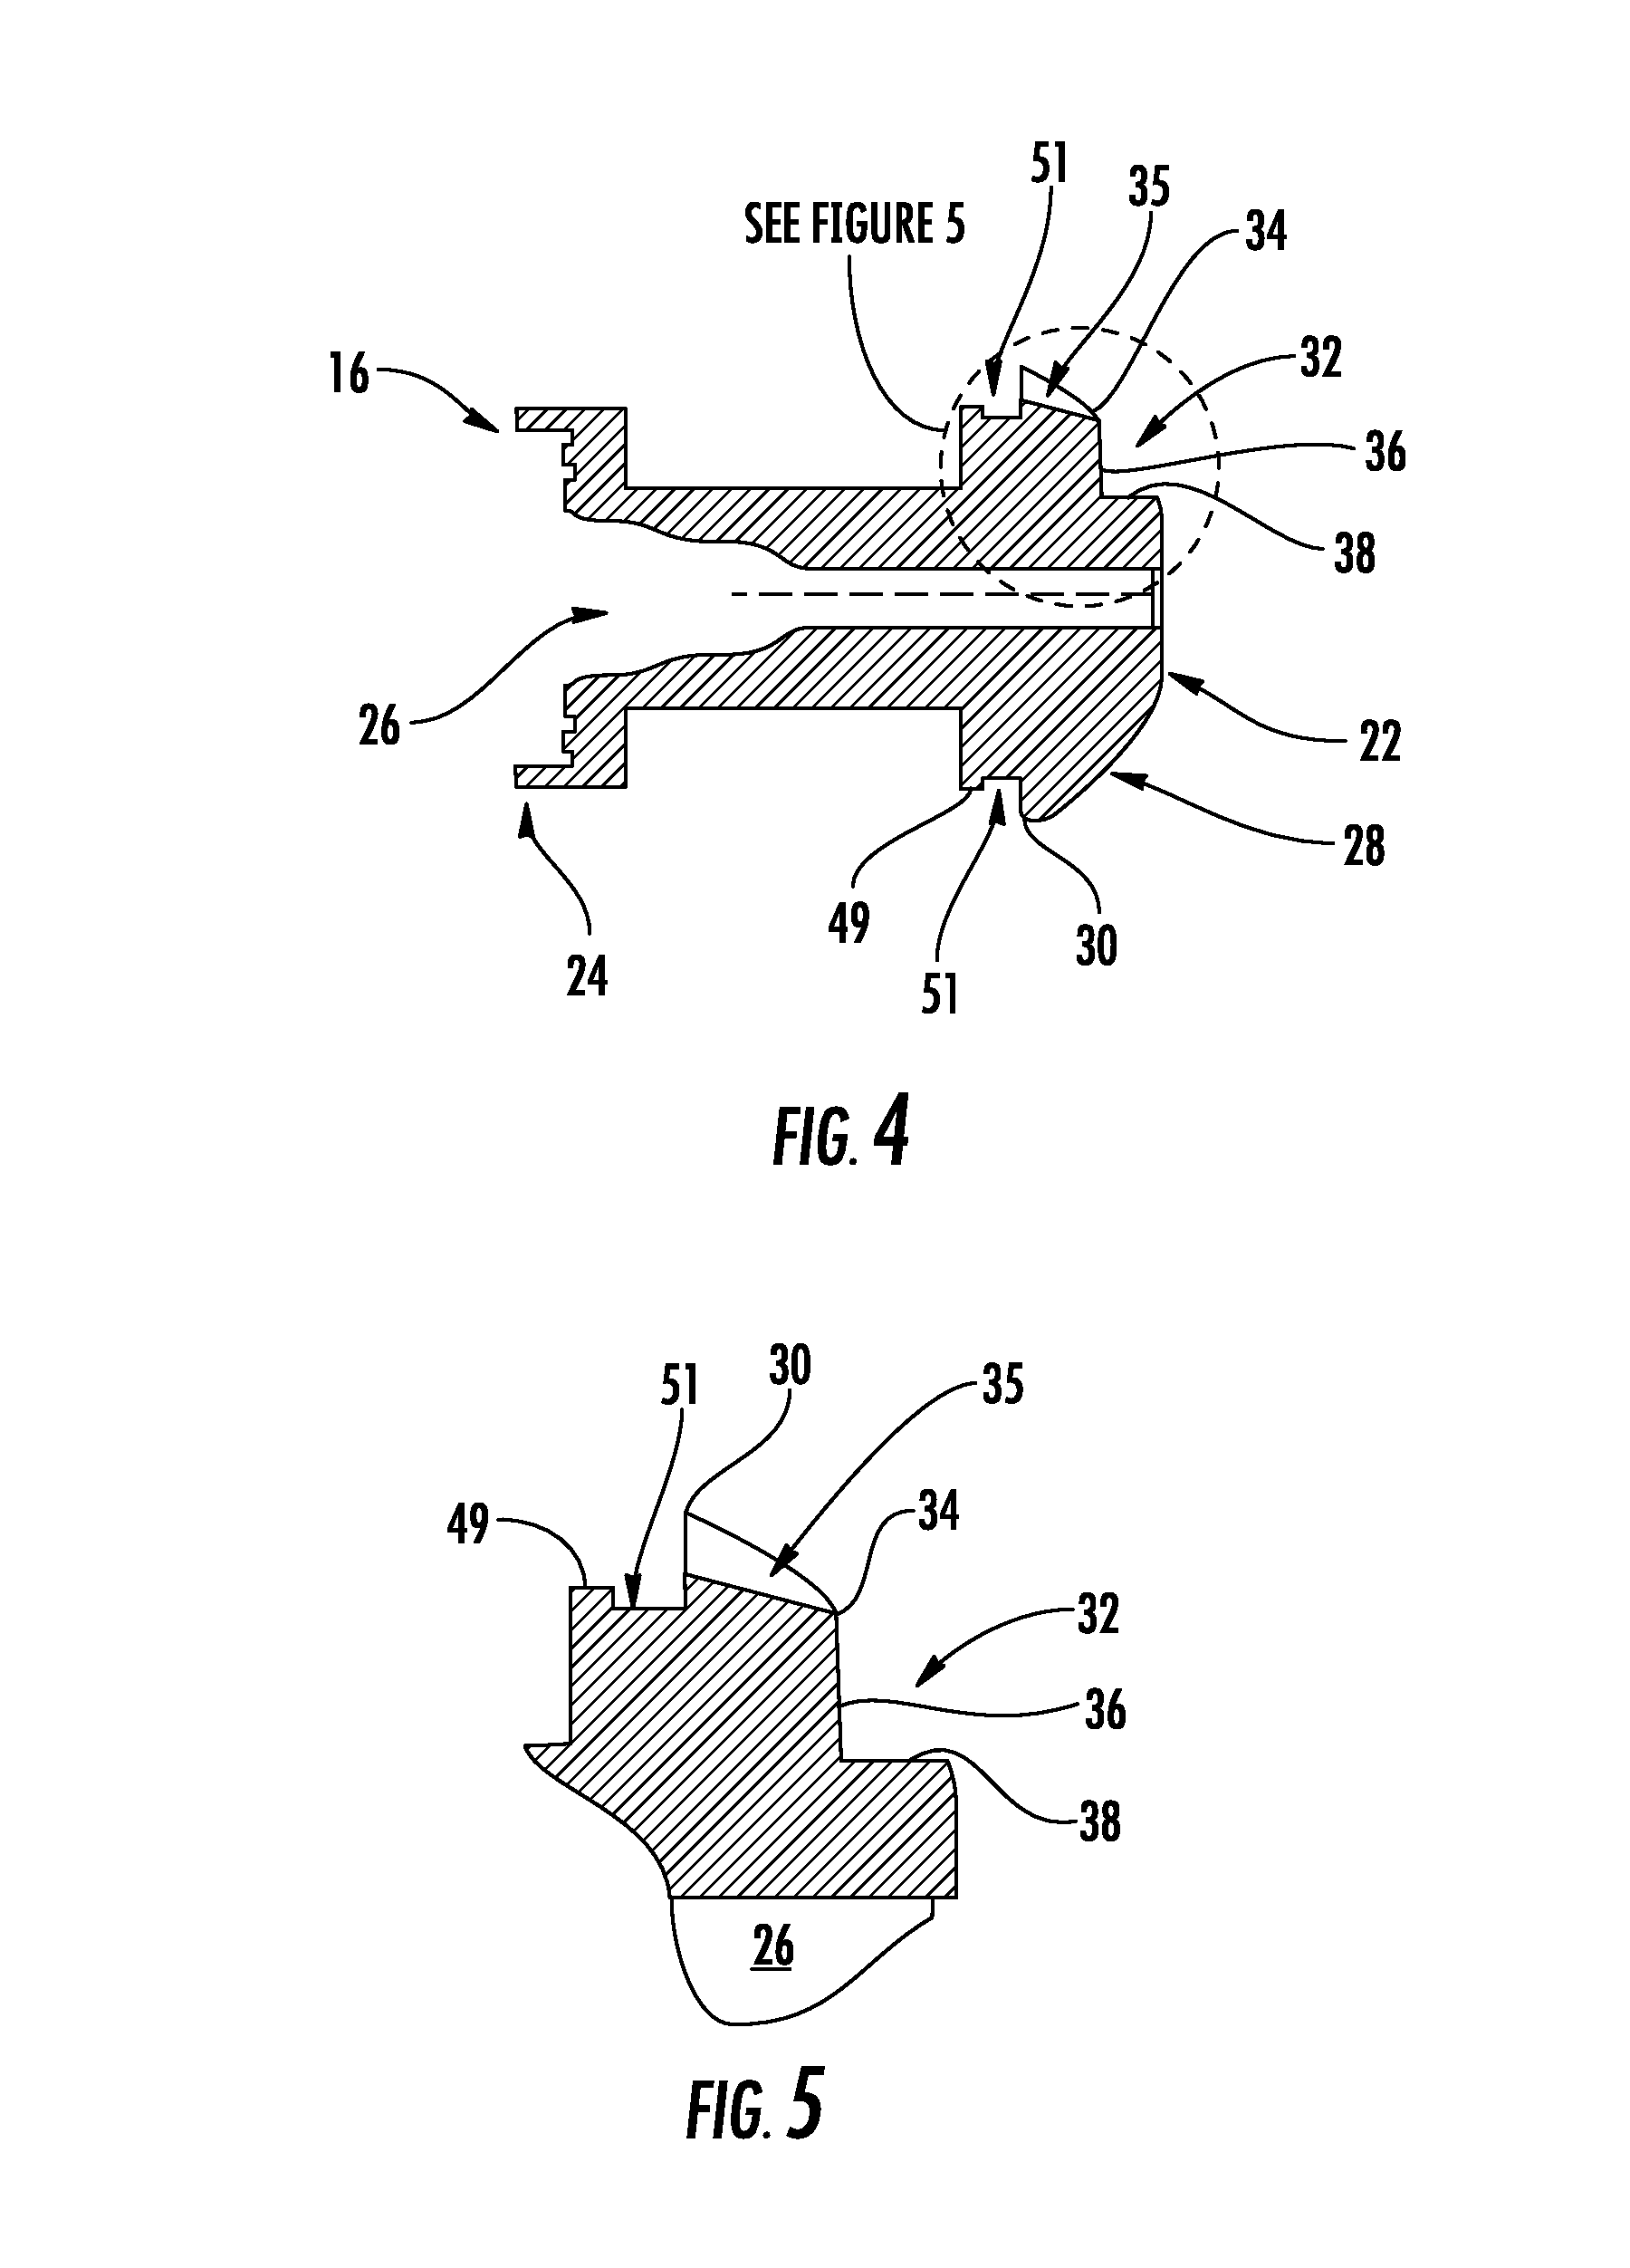 Thermally actuated power element with integral valve member